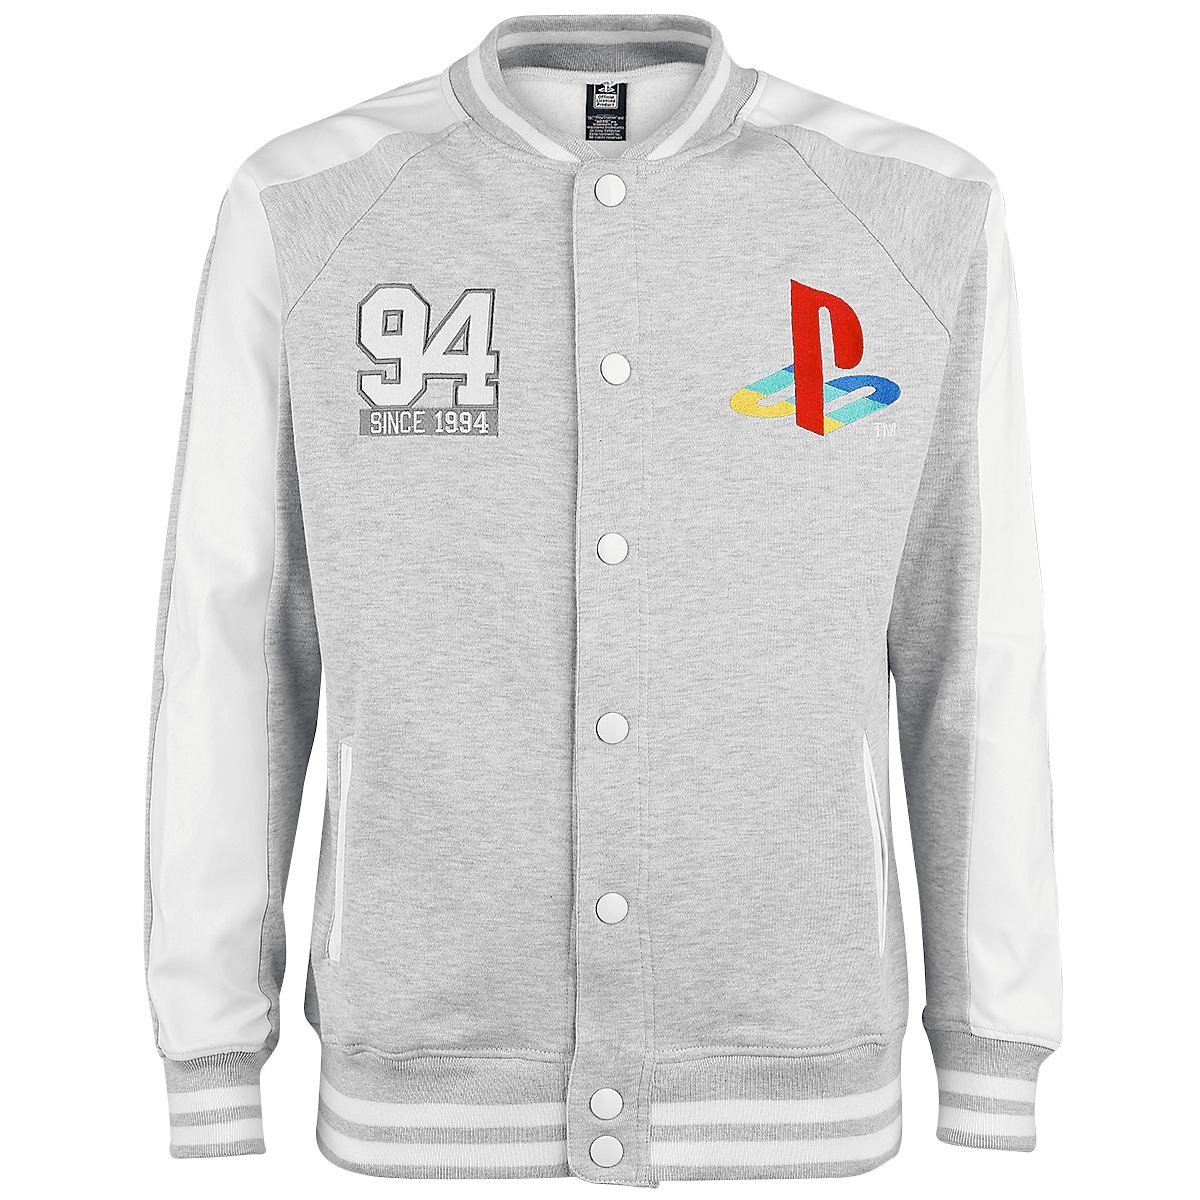 Playstation - Since 94 College Jacket - Grey - Extra large